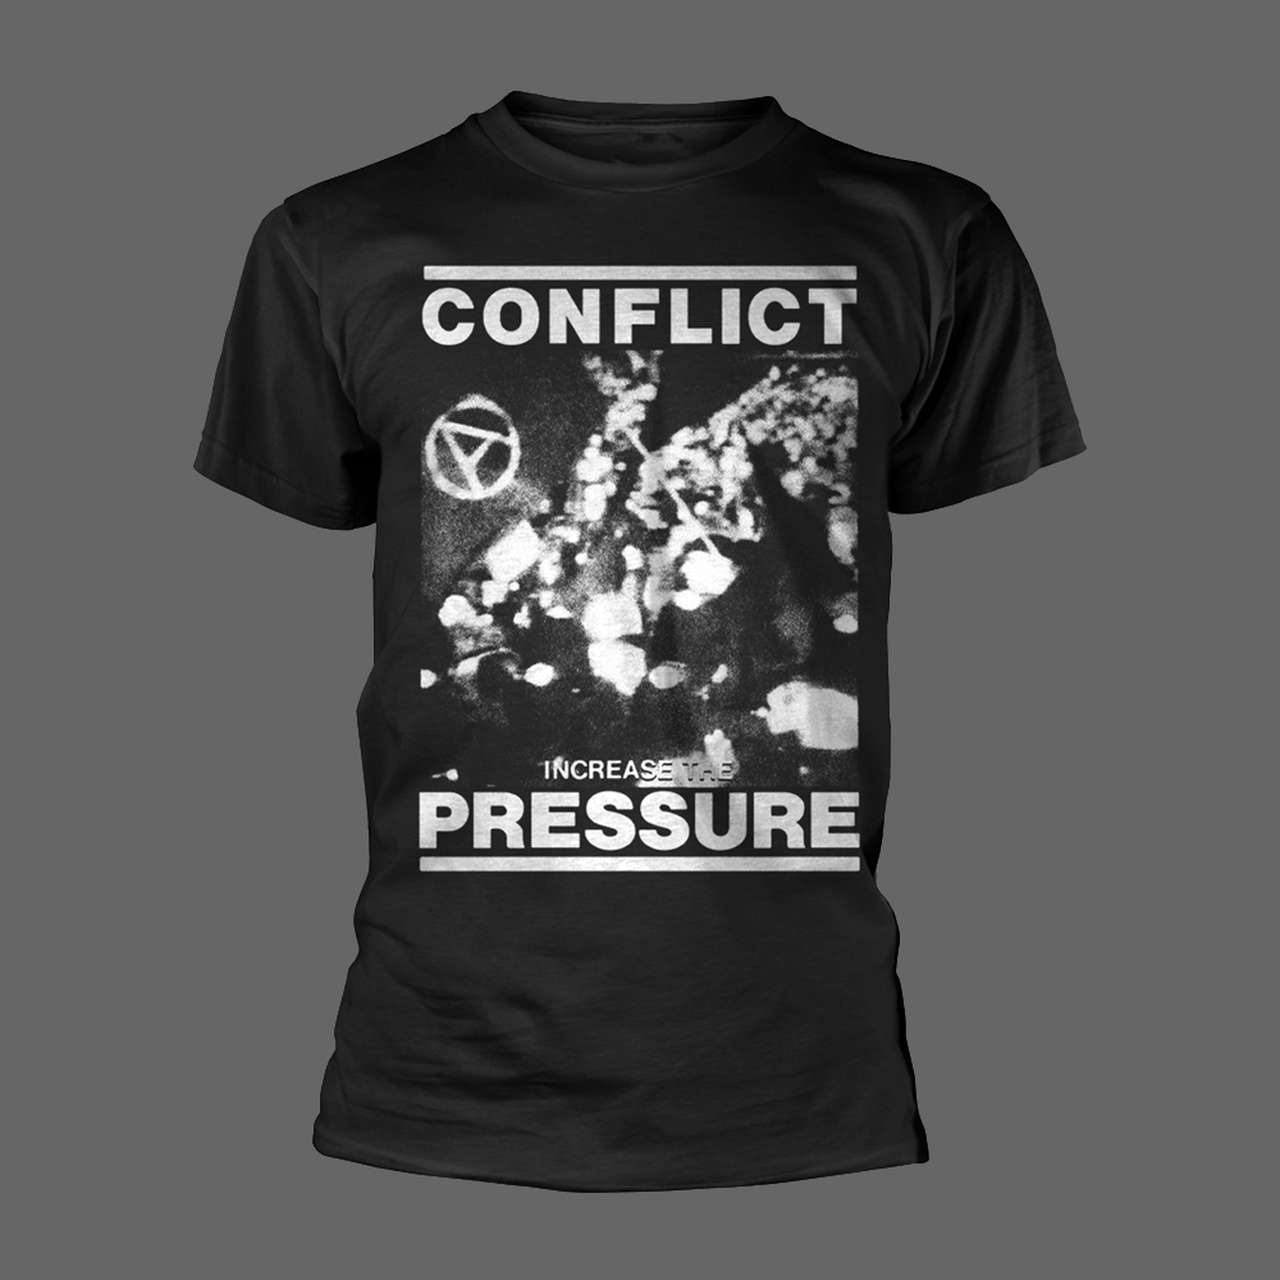 Conflict - Increase the Pressure (Black) (T-Shirt)